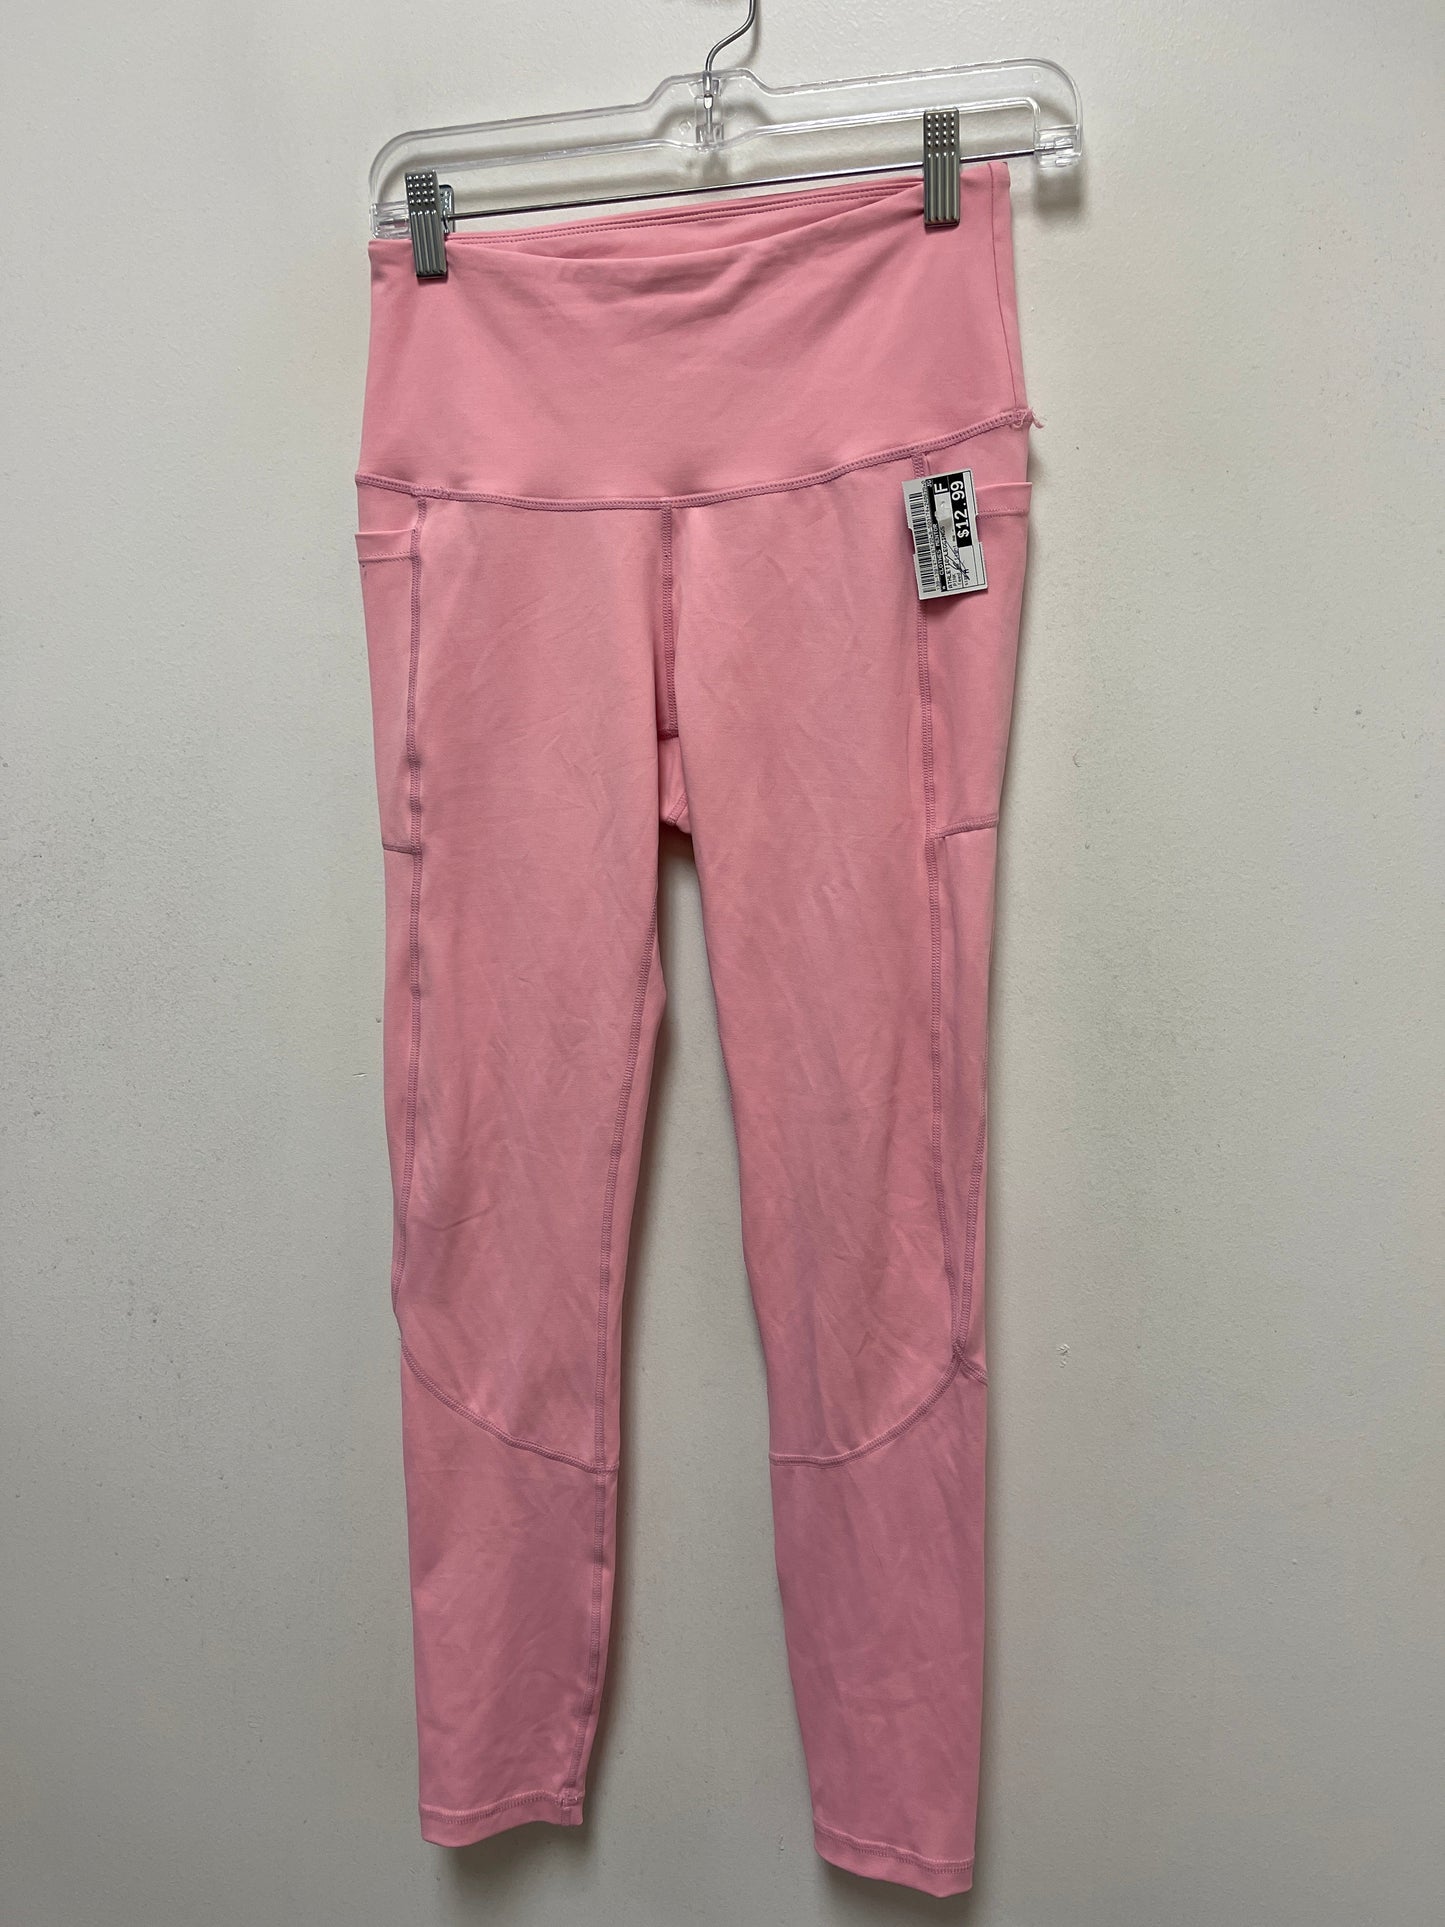 Pink Athletic Leggings Clothes Mentor, Size M